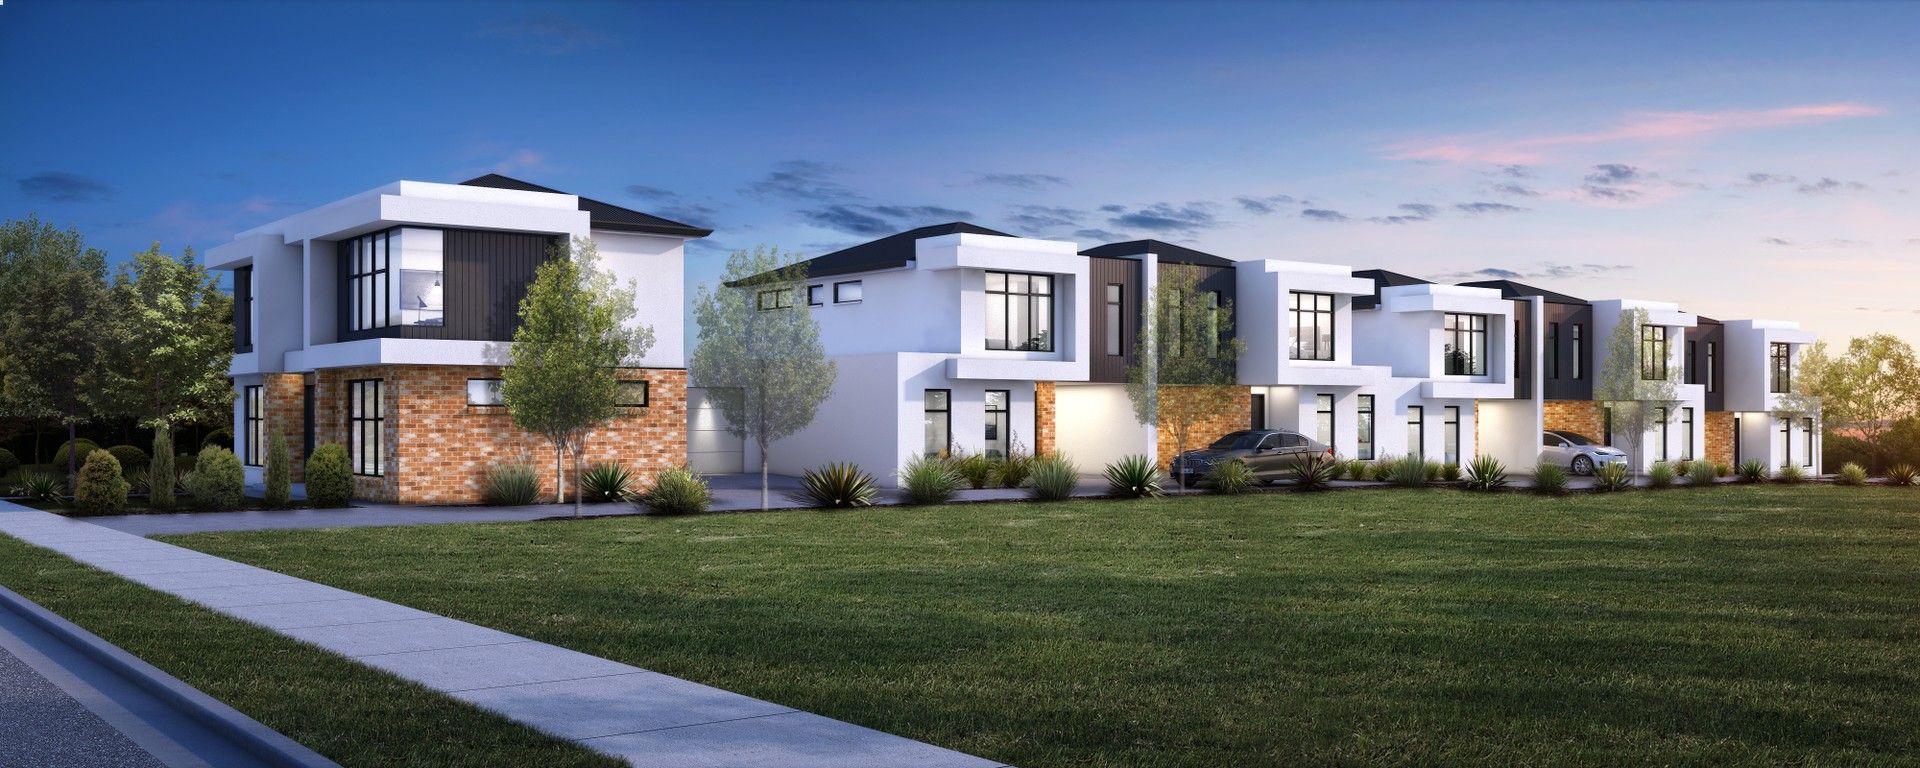 4 bedrooms House in Proposed Dwelling 1-6, 210 Trimmer Parade SEATON SA, 5023